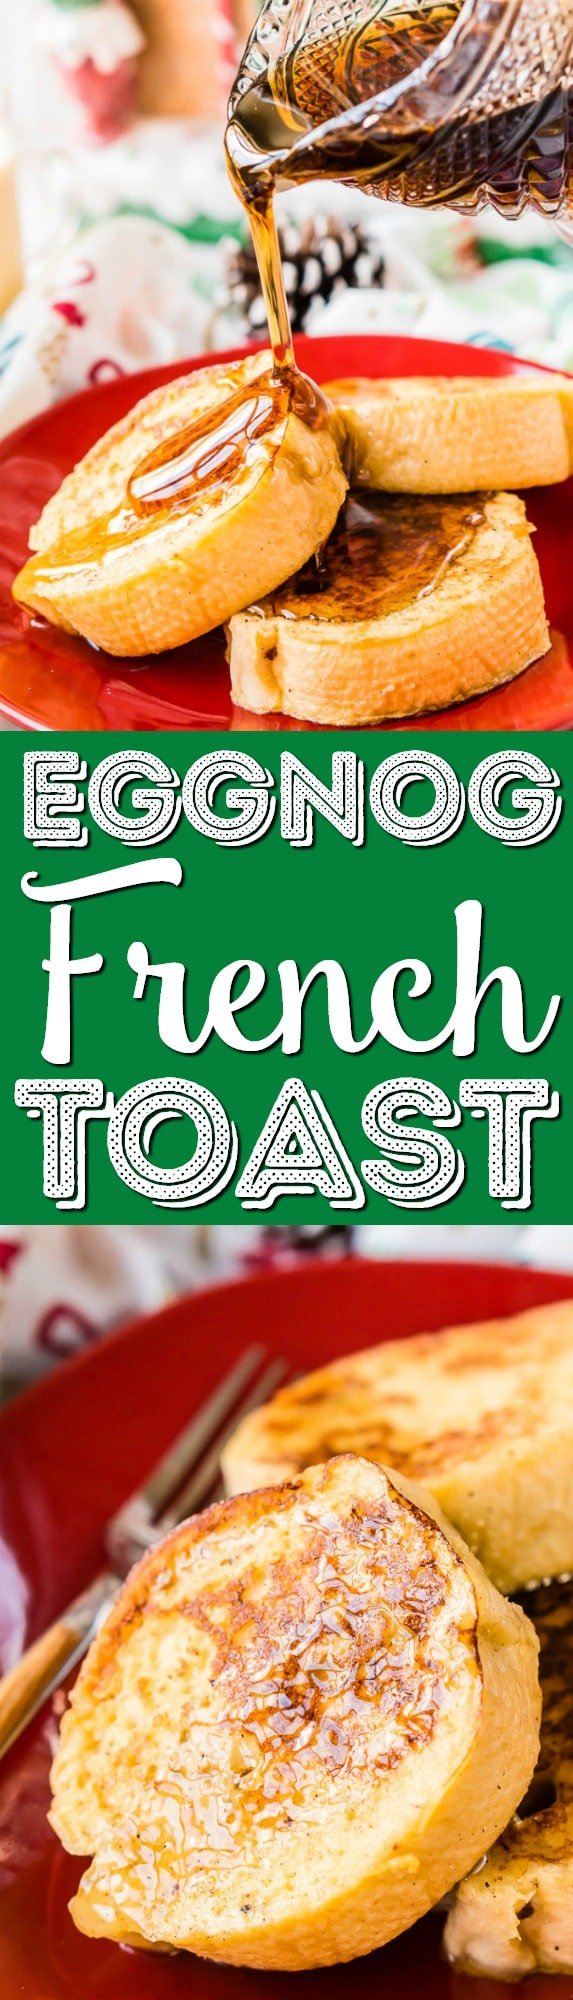 This Eggnog French Toast is dipped in a mixture of eggnog, eggs, rum, vanilla, and nutmeg before it's cooked to perfection and slathered in syrup for a delicious holiday breakfast! via @sugarandsoulco